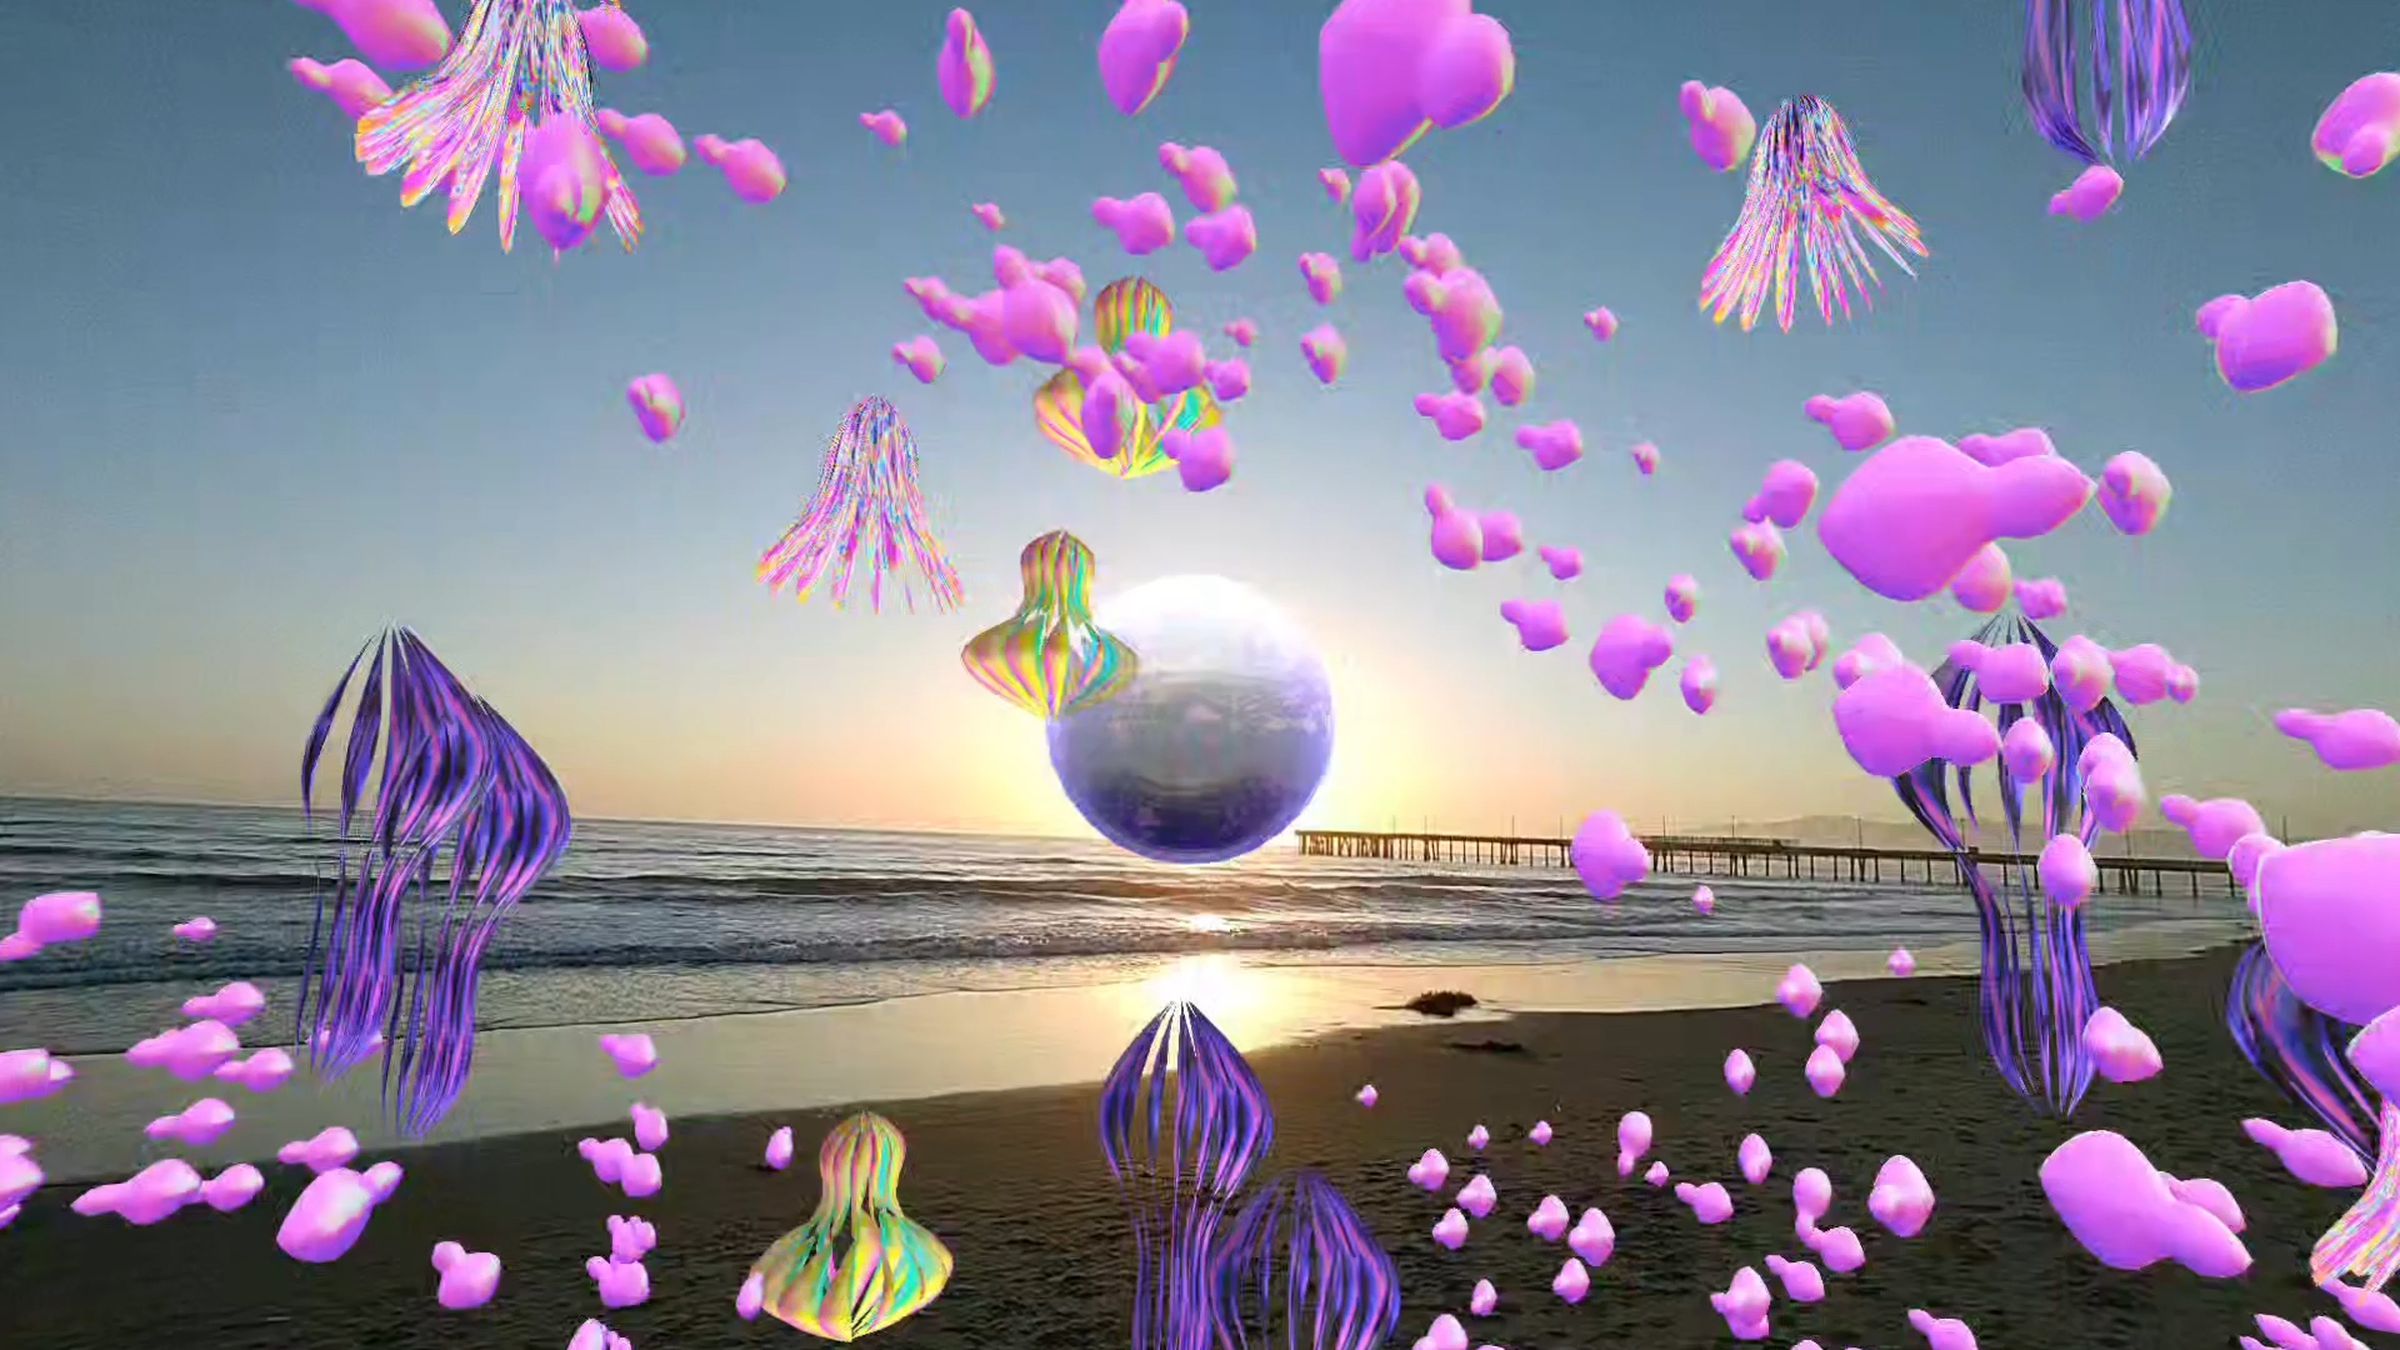 An image showing sea creatures like jelly fish floating through the air above the beach at sunset. It’s a first person view through the new Spectacles.